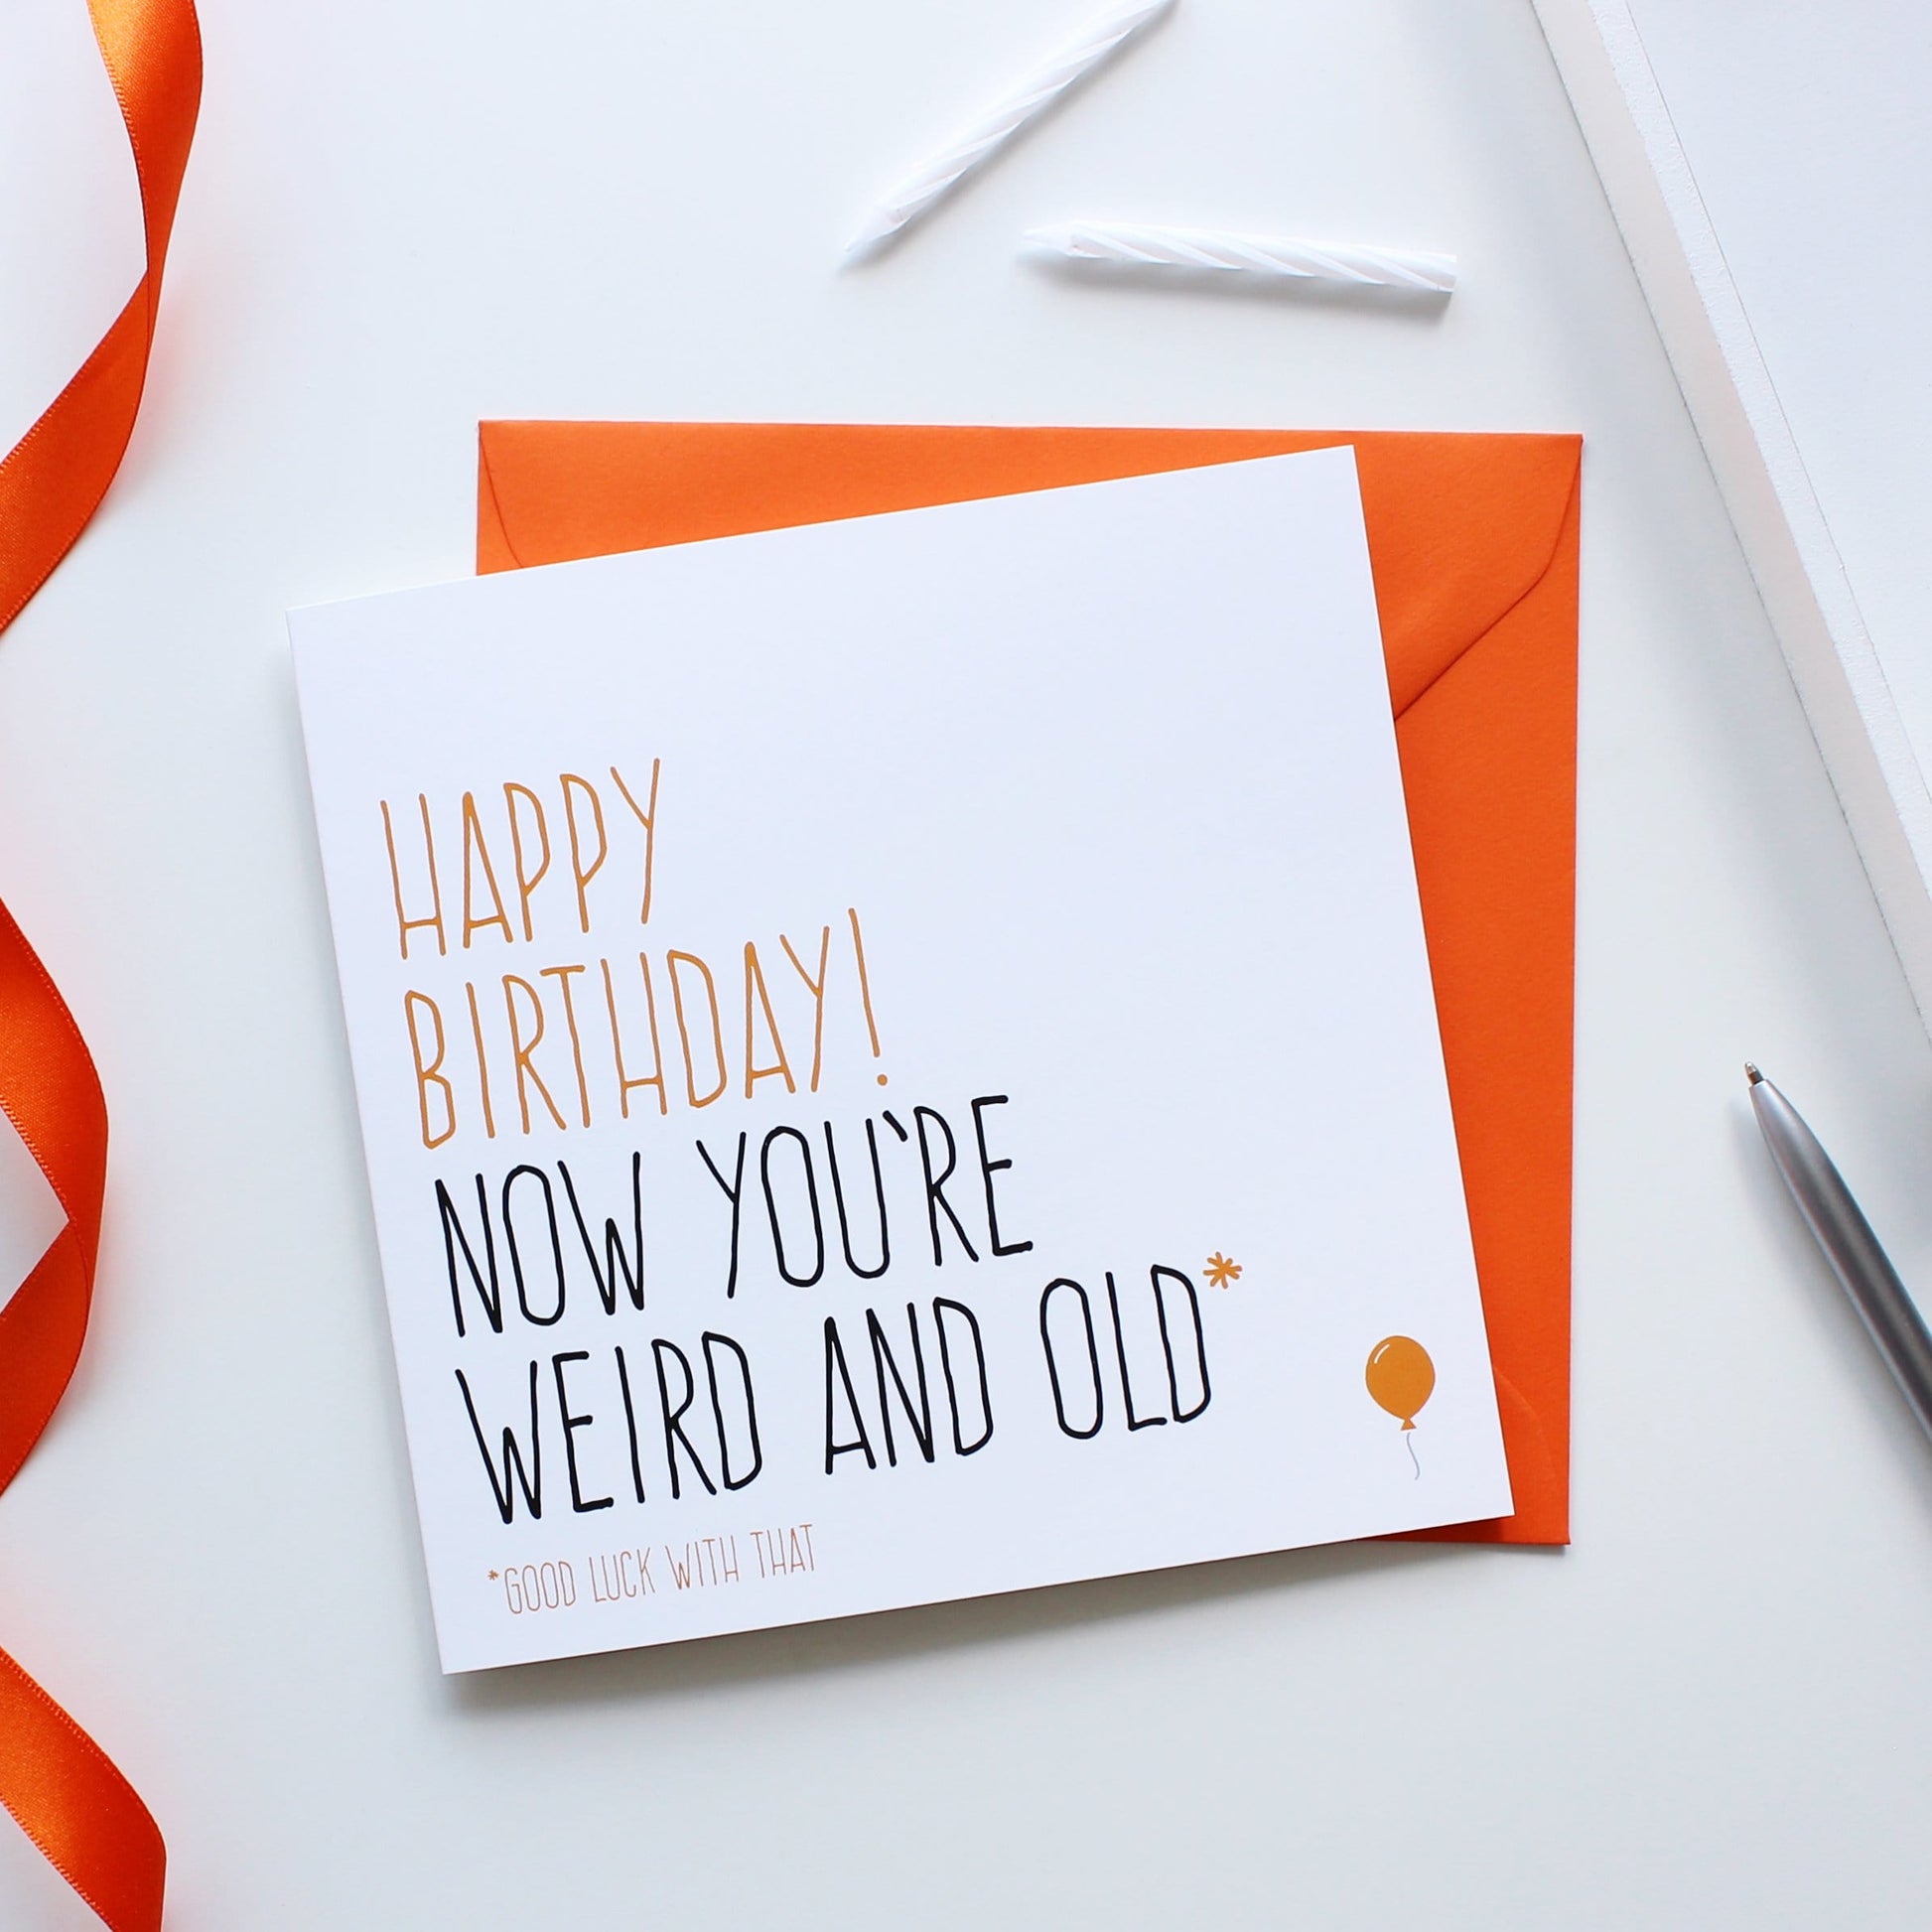 Now you're weird & old birthday card from Purple Tree Designs